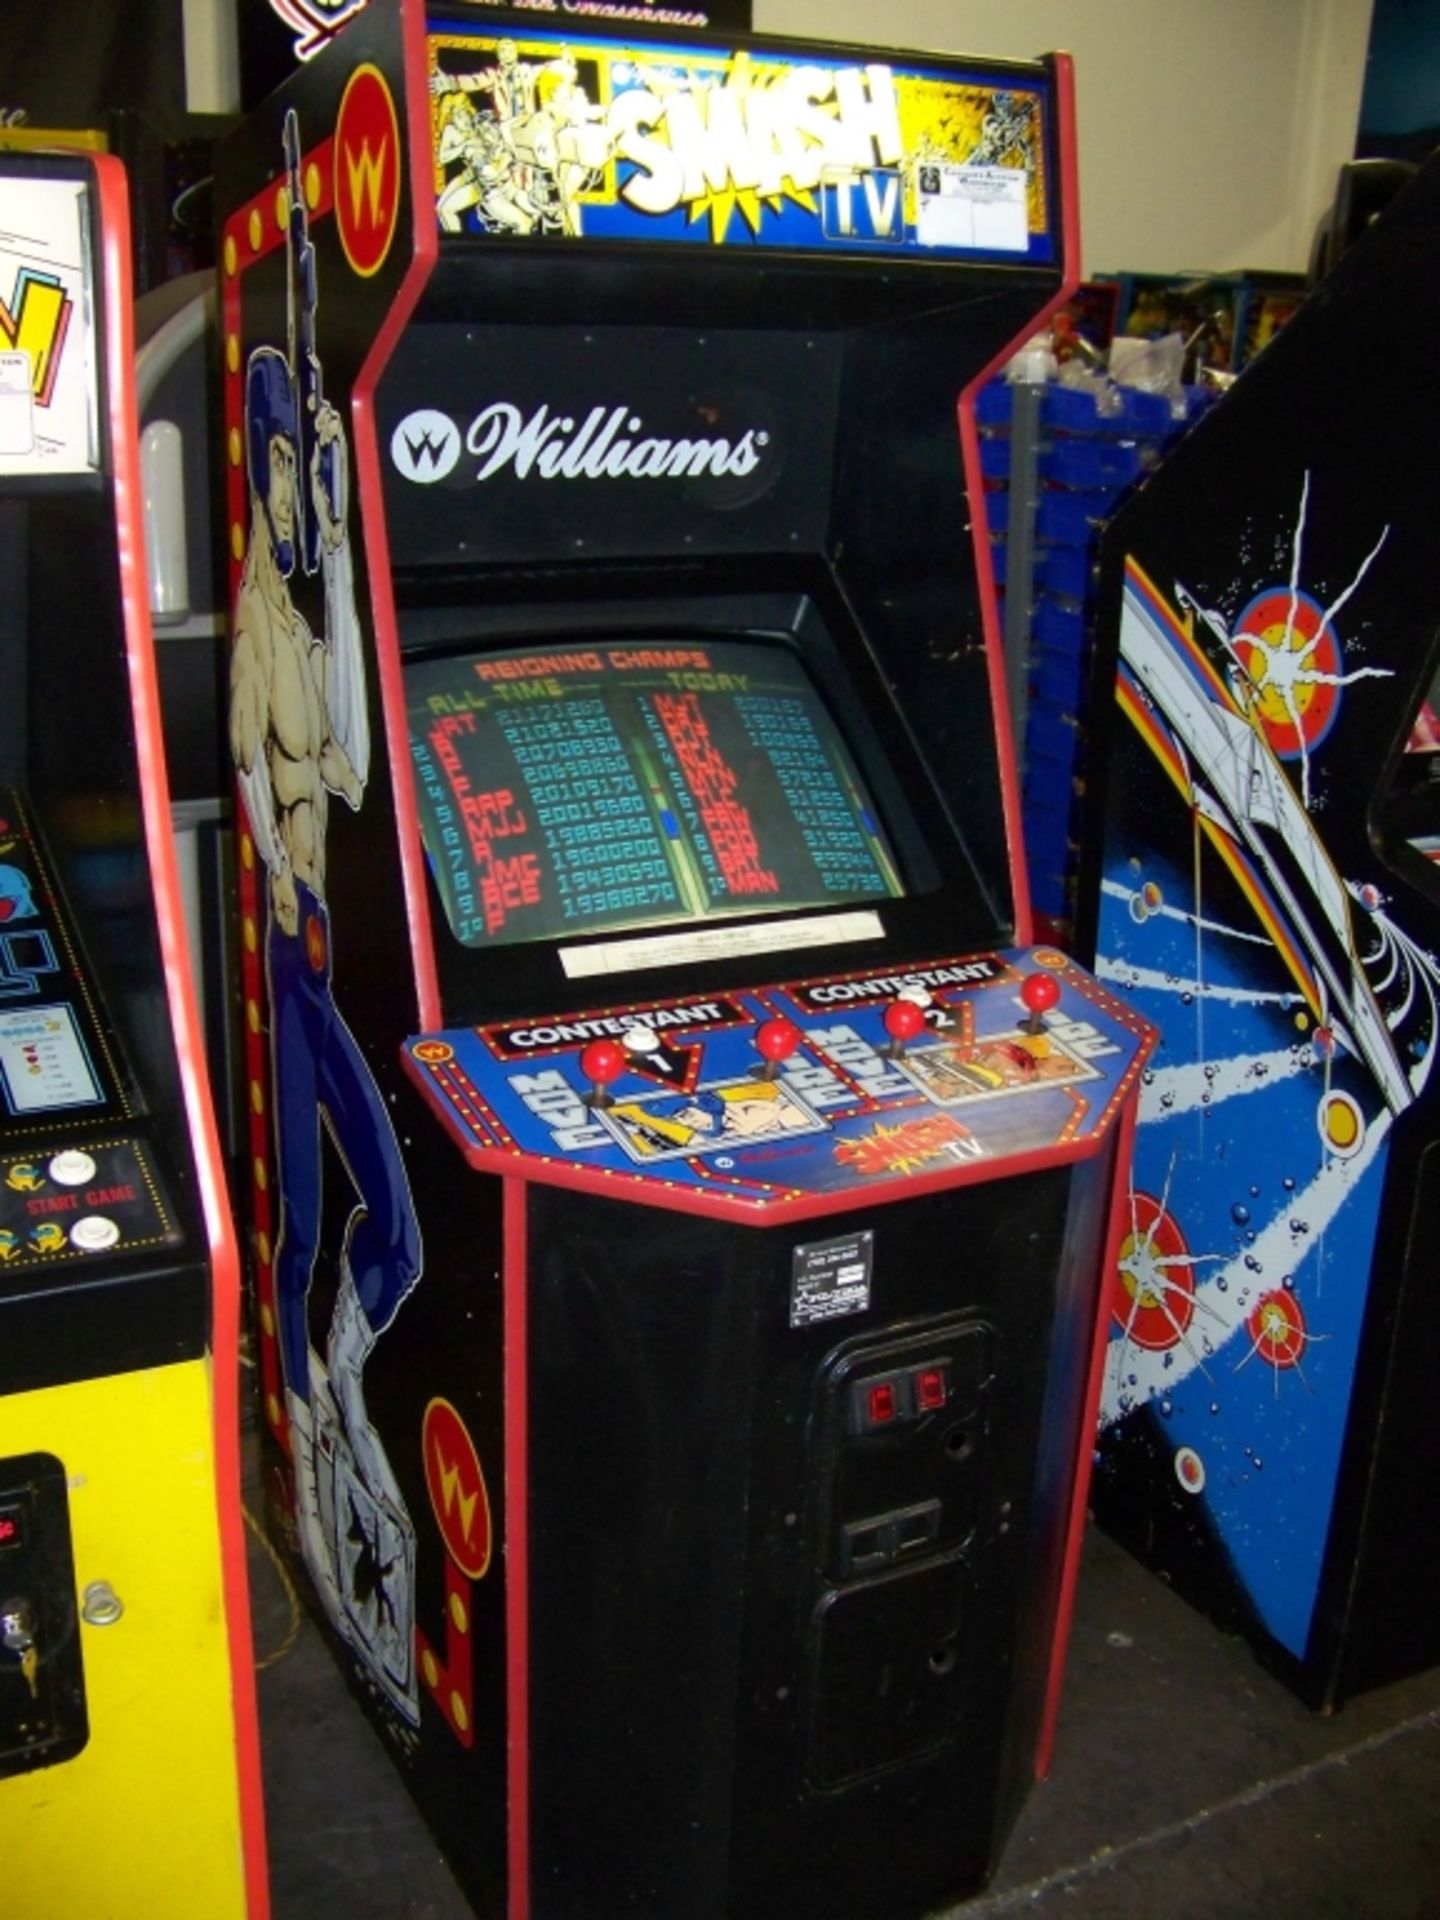 SMASH TV CLASSIC ARCADE GAME WILLIAMS Item is in used condition. Evidence of wear and commercial - Image 5 of 9